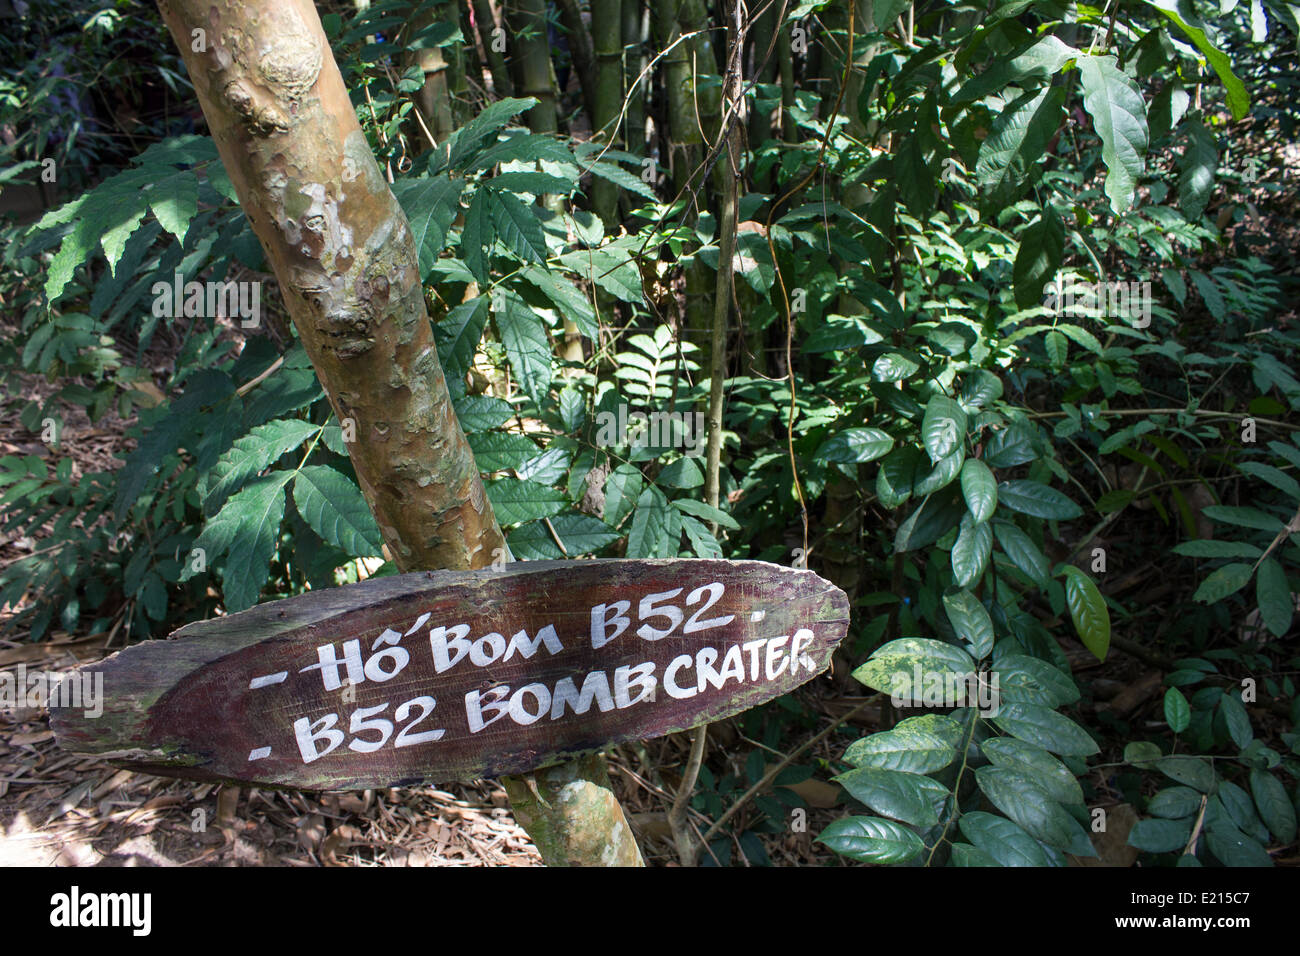 A B52 bomb crater at the Cu Chi Tunnels in Ho Chi Minh City, Vietnam. Stock Photo